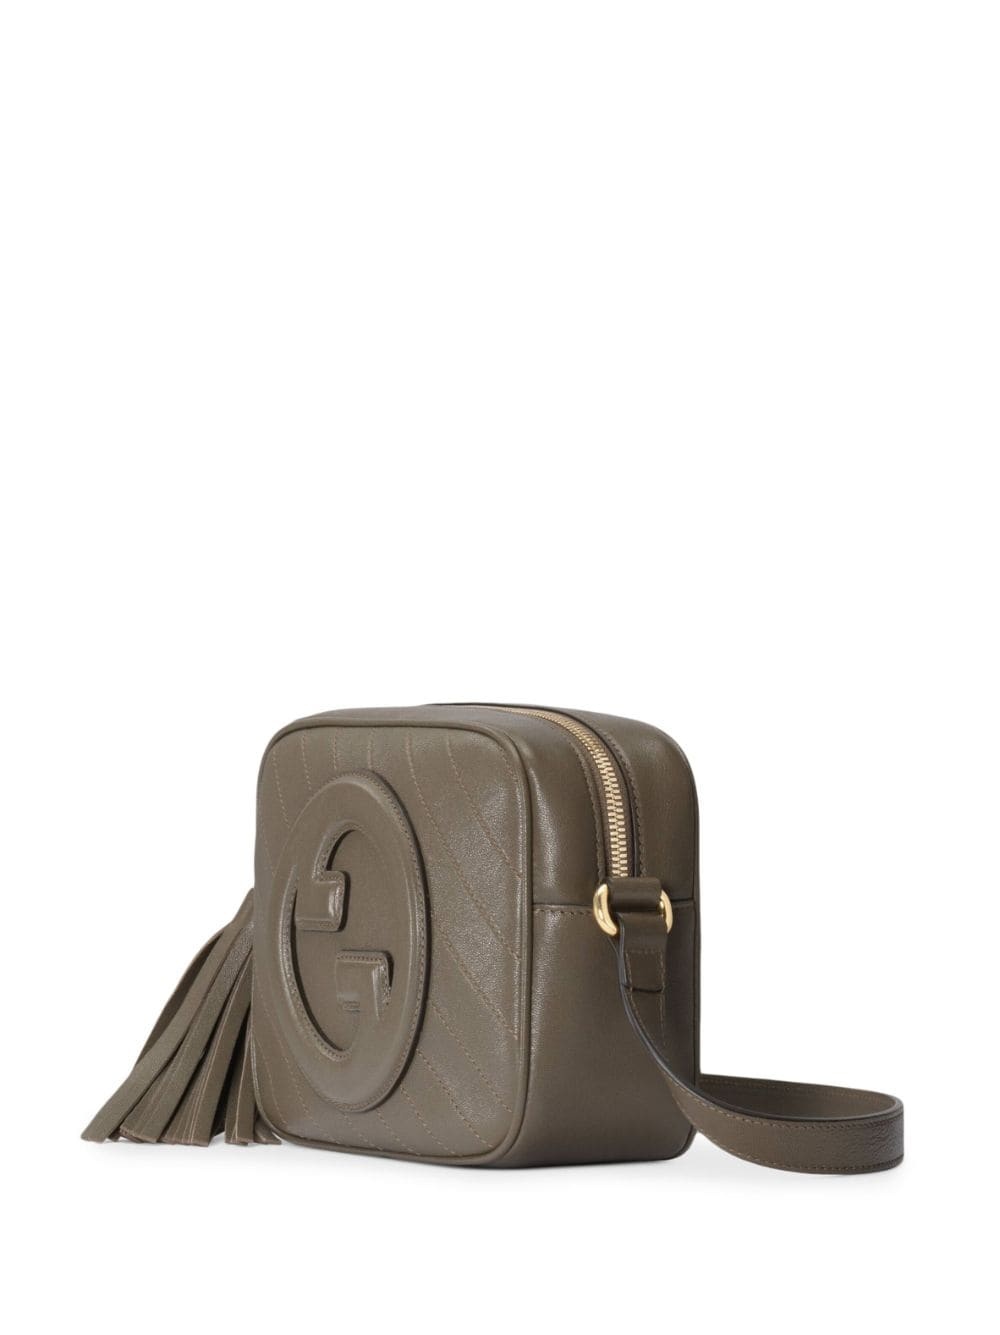 Gucci blondie small leather shoulder bag - 3